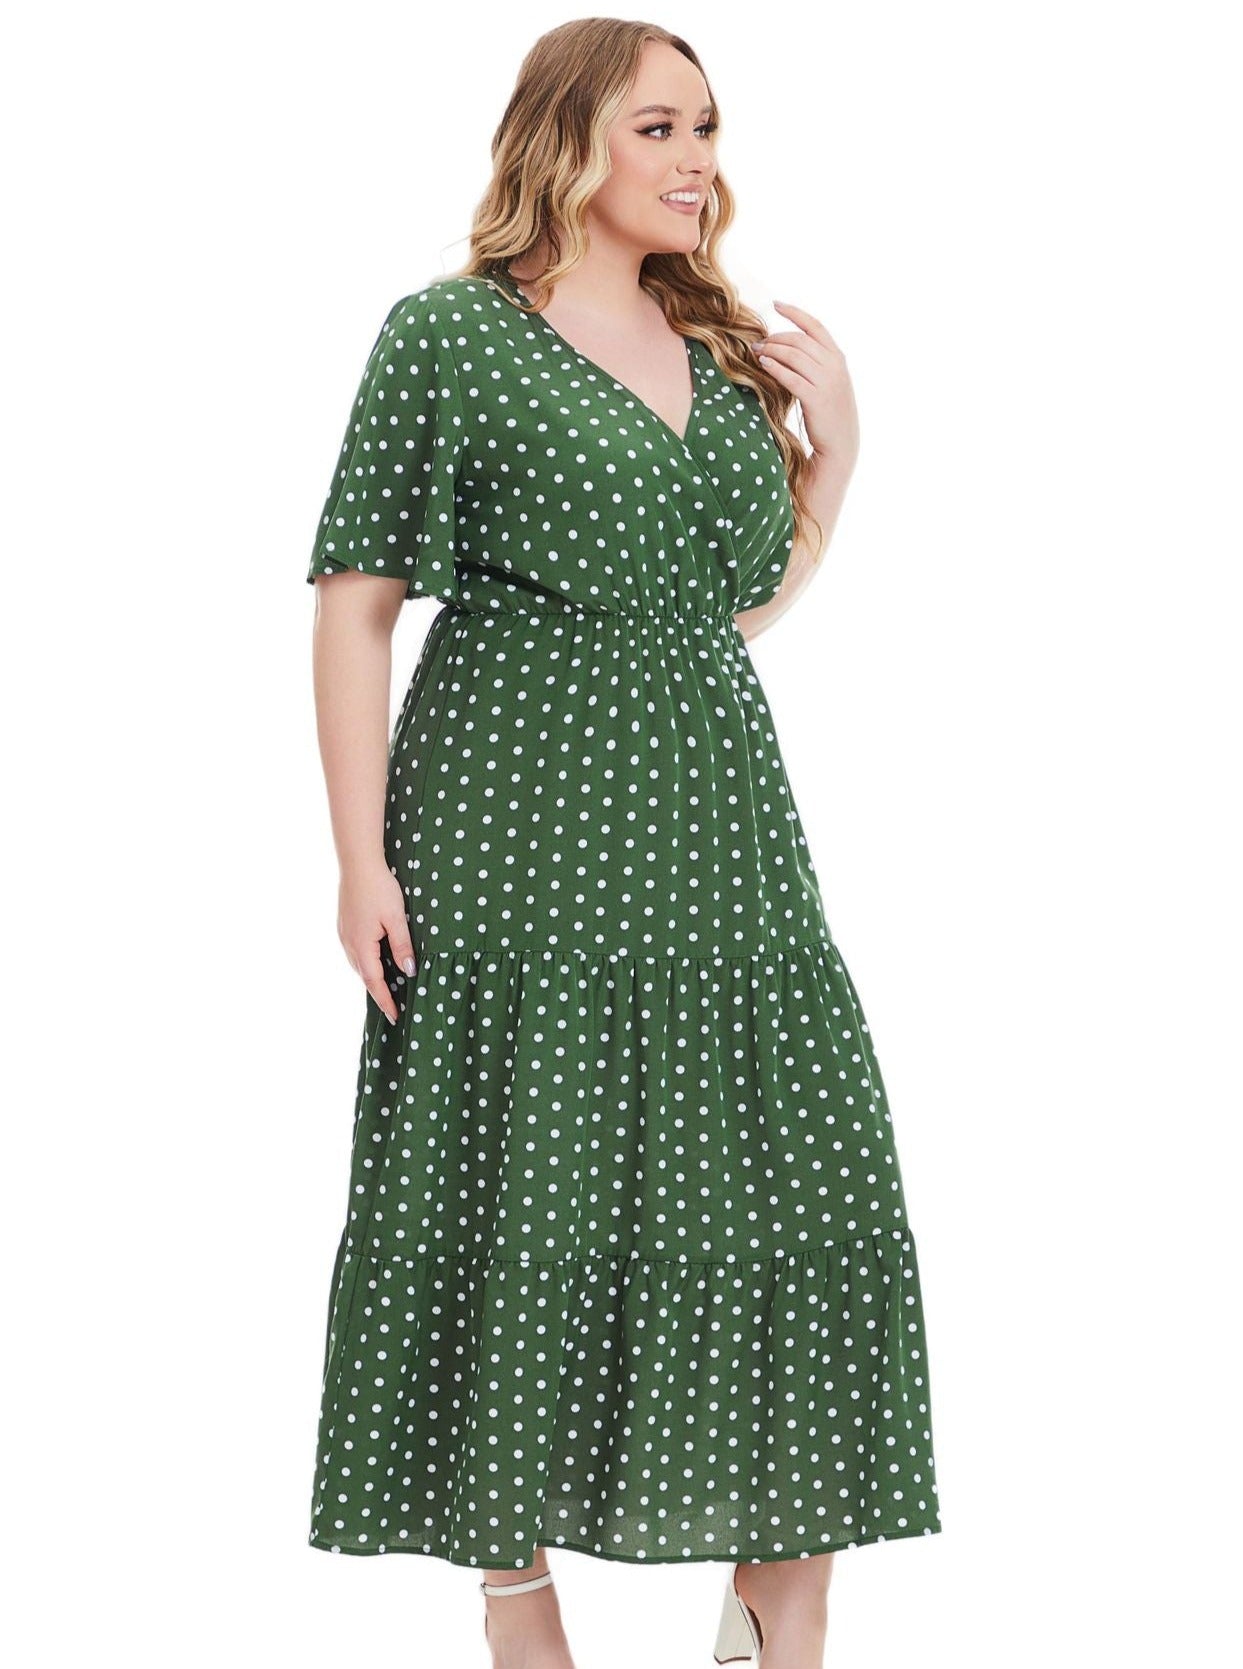 Plus Size Green and White Polka Dots Dress